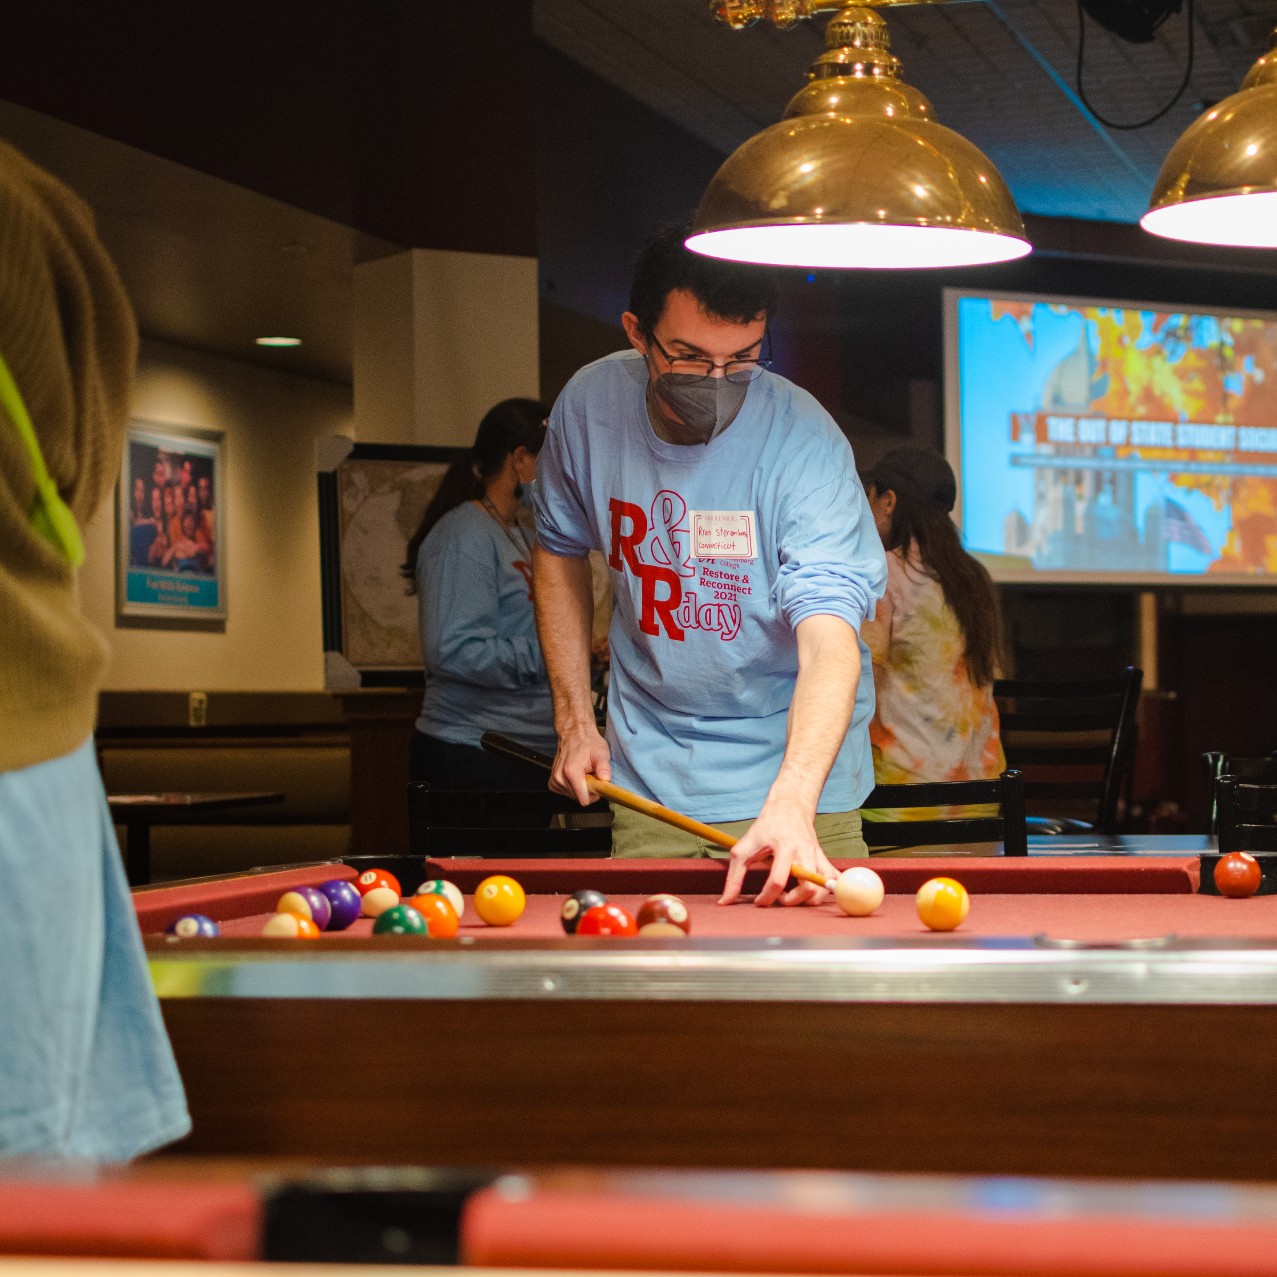 A student plays pool during the Out of State Social event sponsored by the Office of Housing and Residential Life.